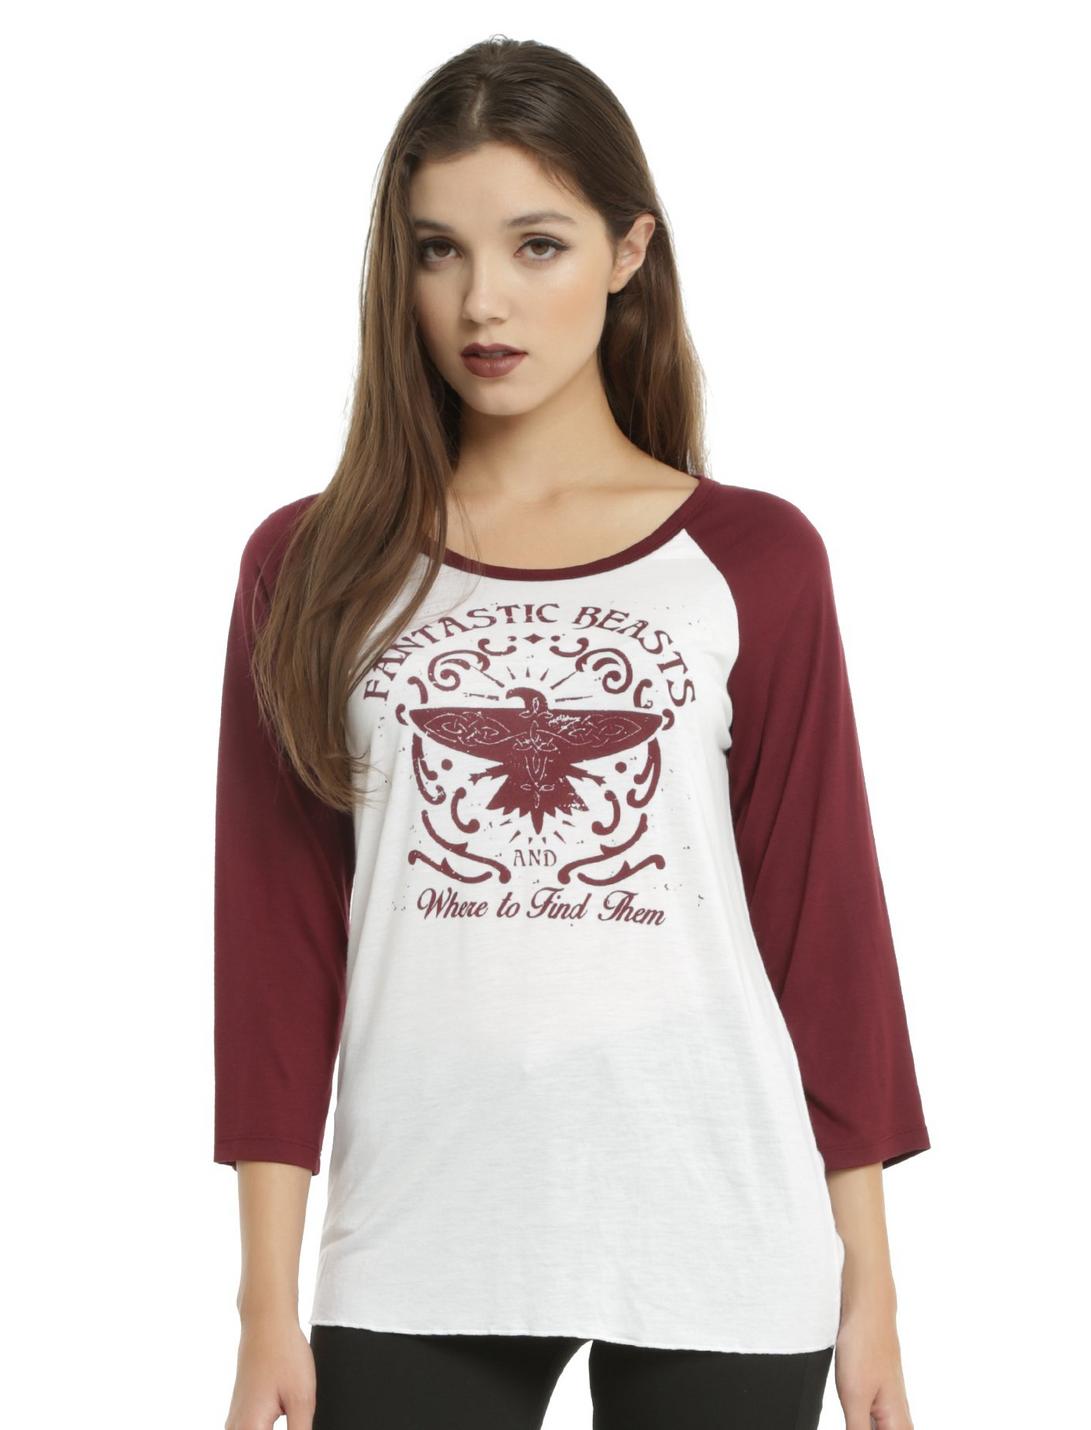 Fantastic Beasts And Where To Find Them Logo Girls Raglan, WHITE, hi-res